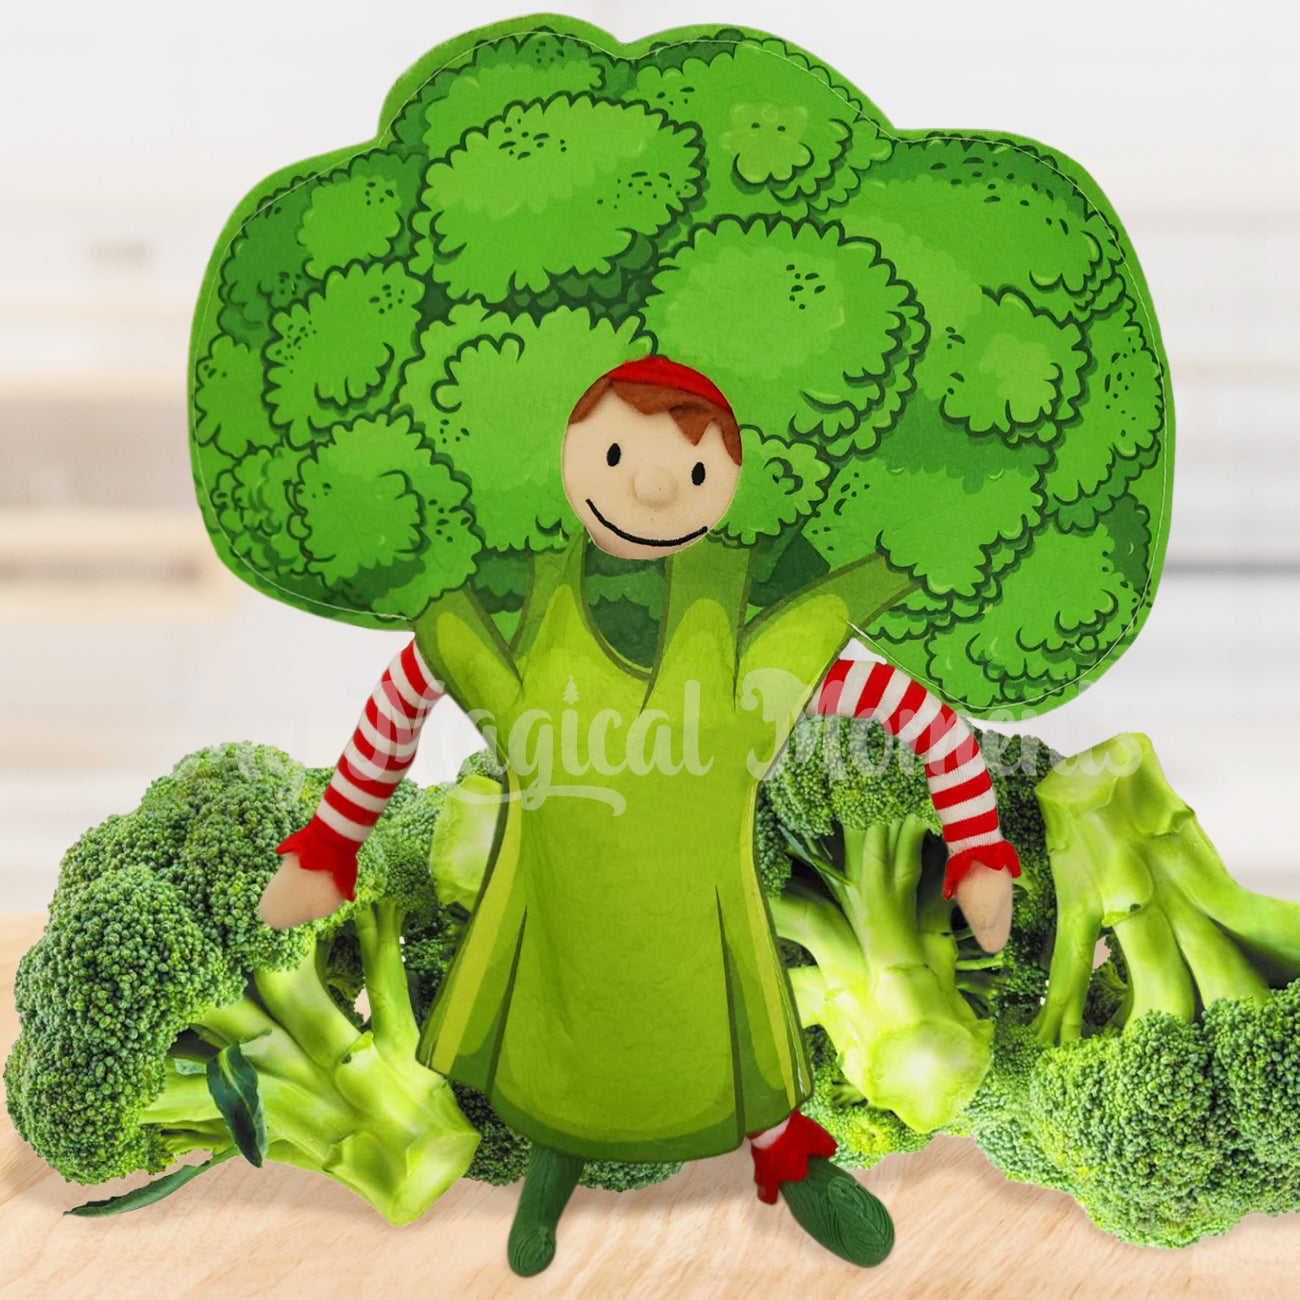 Broccoli Elf Costume worn by Elf For Christmas in a scene with broccoli by My Magical Moments